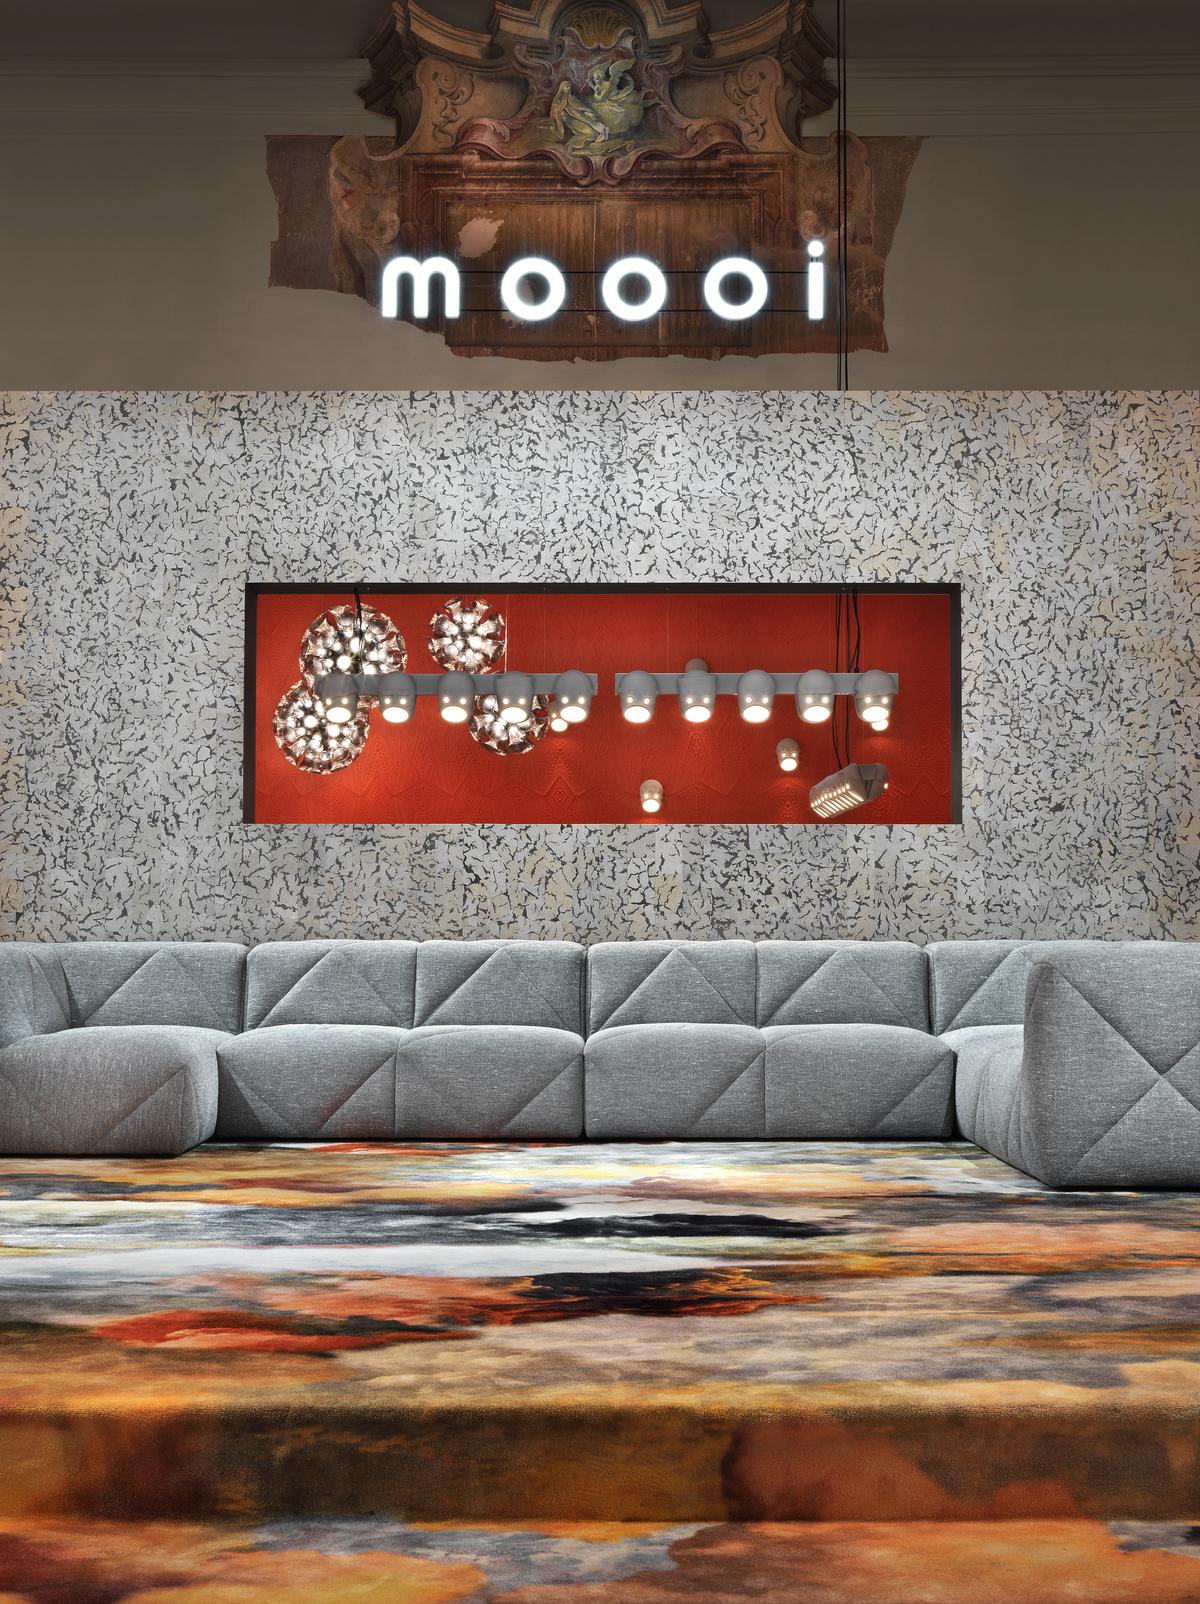 Moooi BFF Double Seater DE01 Low Sofa in Solis, Sunset Red Upholstery In New Condition For Sale In Brooklyn, NY